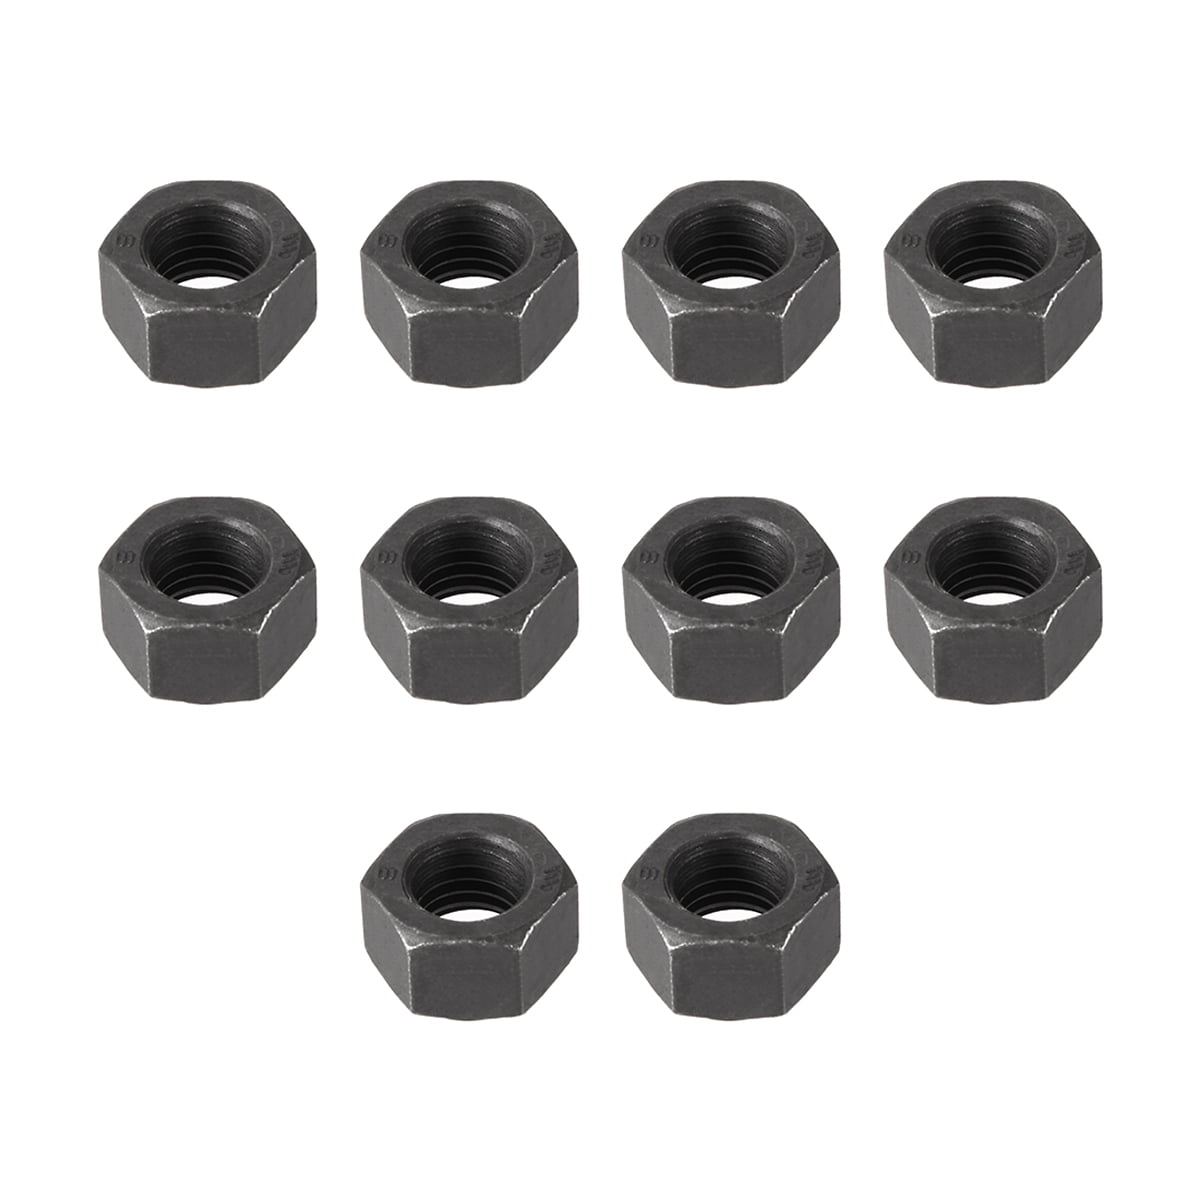 Hex Finished Nut Grade 2 Zinc Plated Carbon Steel Metric Coarse Black And White 